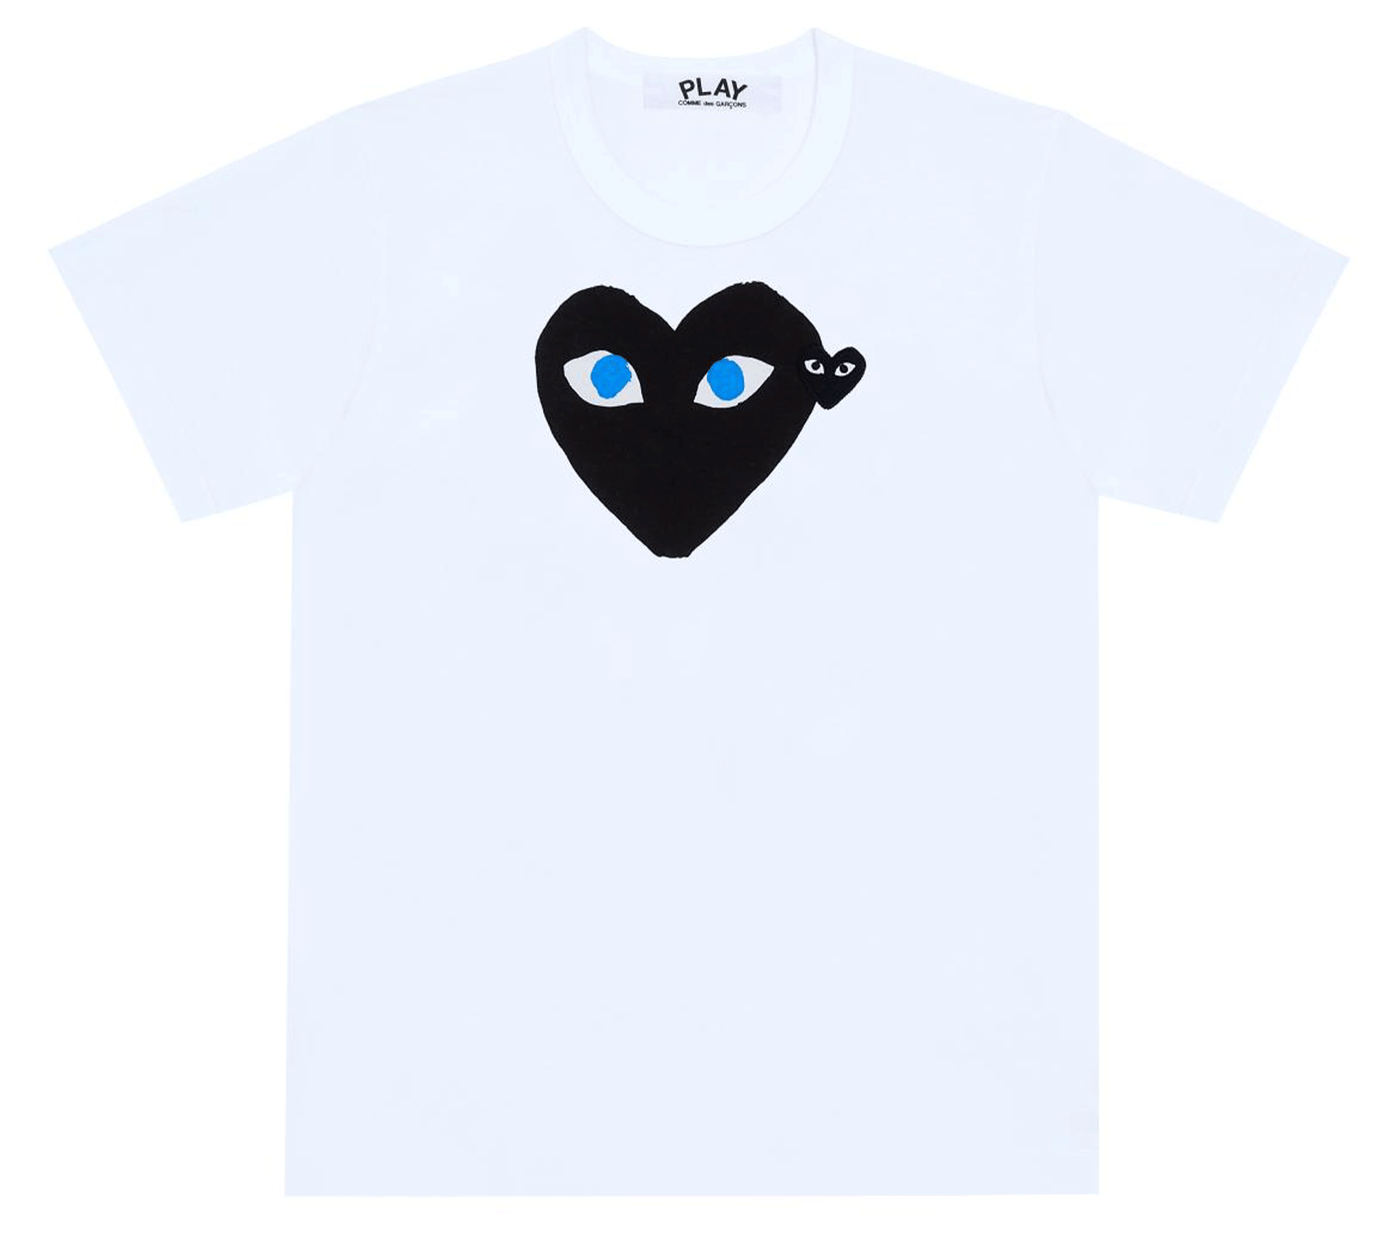 Comme-des-Garcons-Play-Black-Heart-With-Blue-Eyes-T-Shirt-Men-White-1